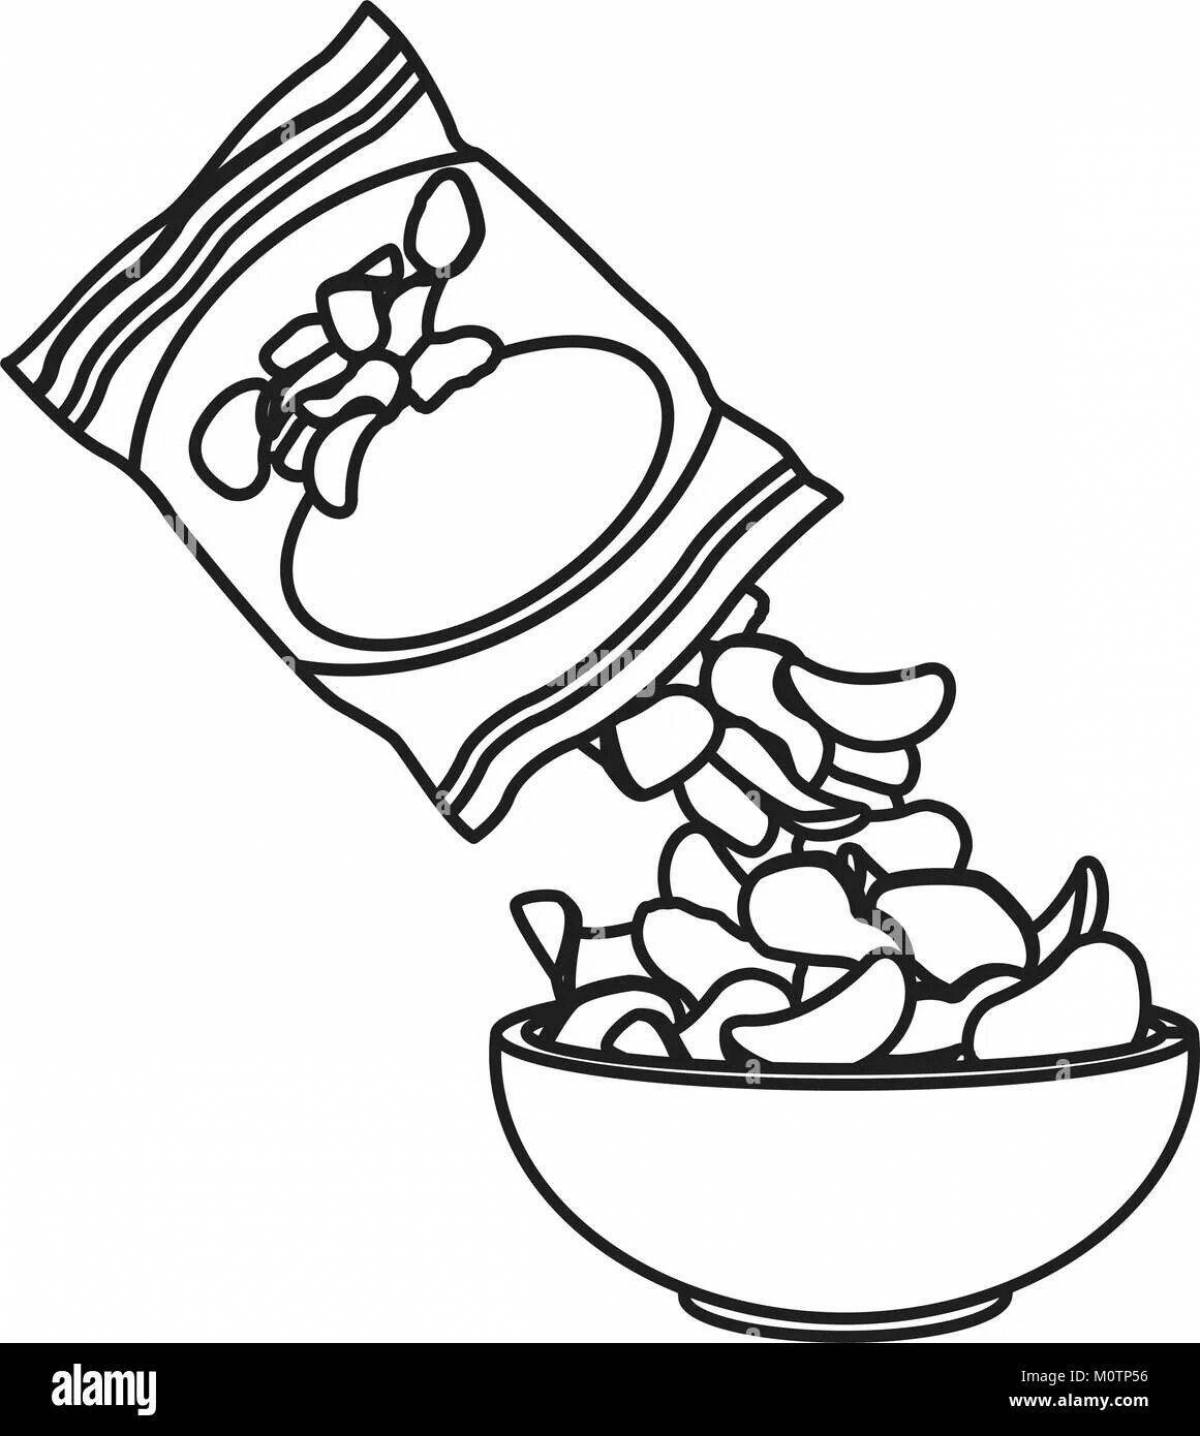 Coloring page for a tasty bag of chips